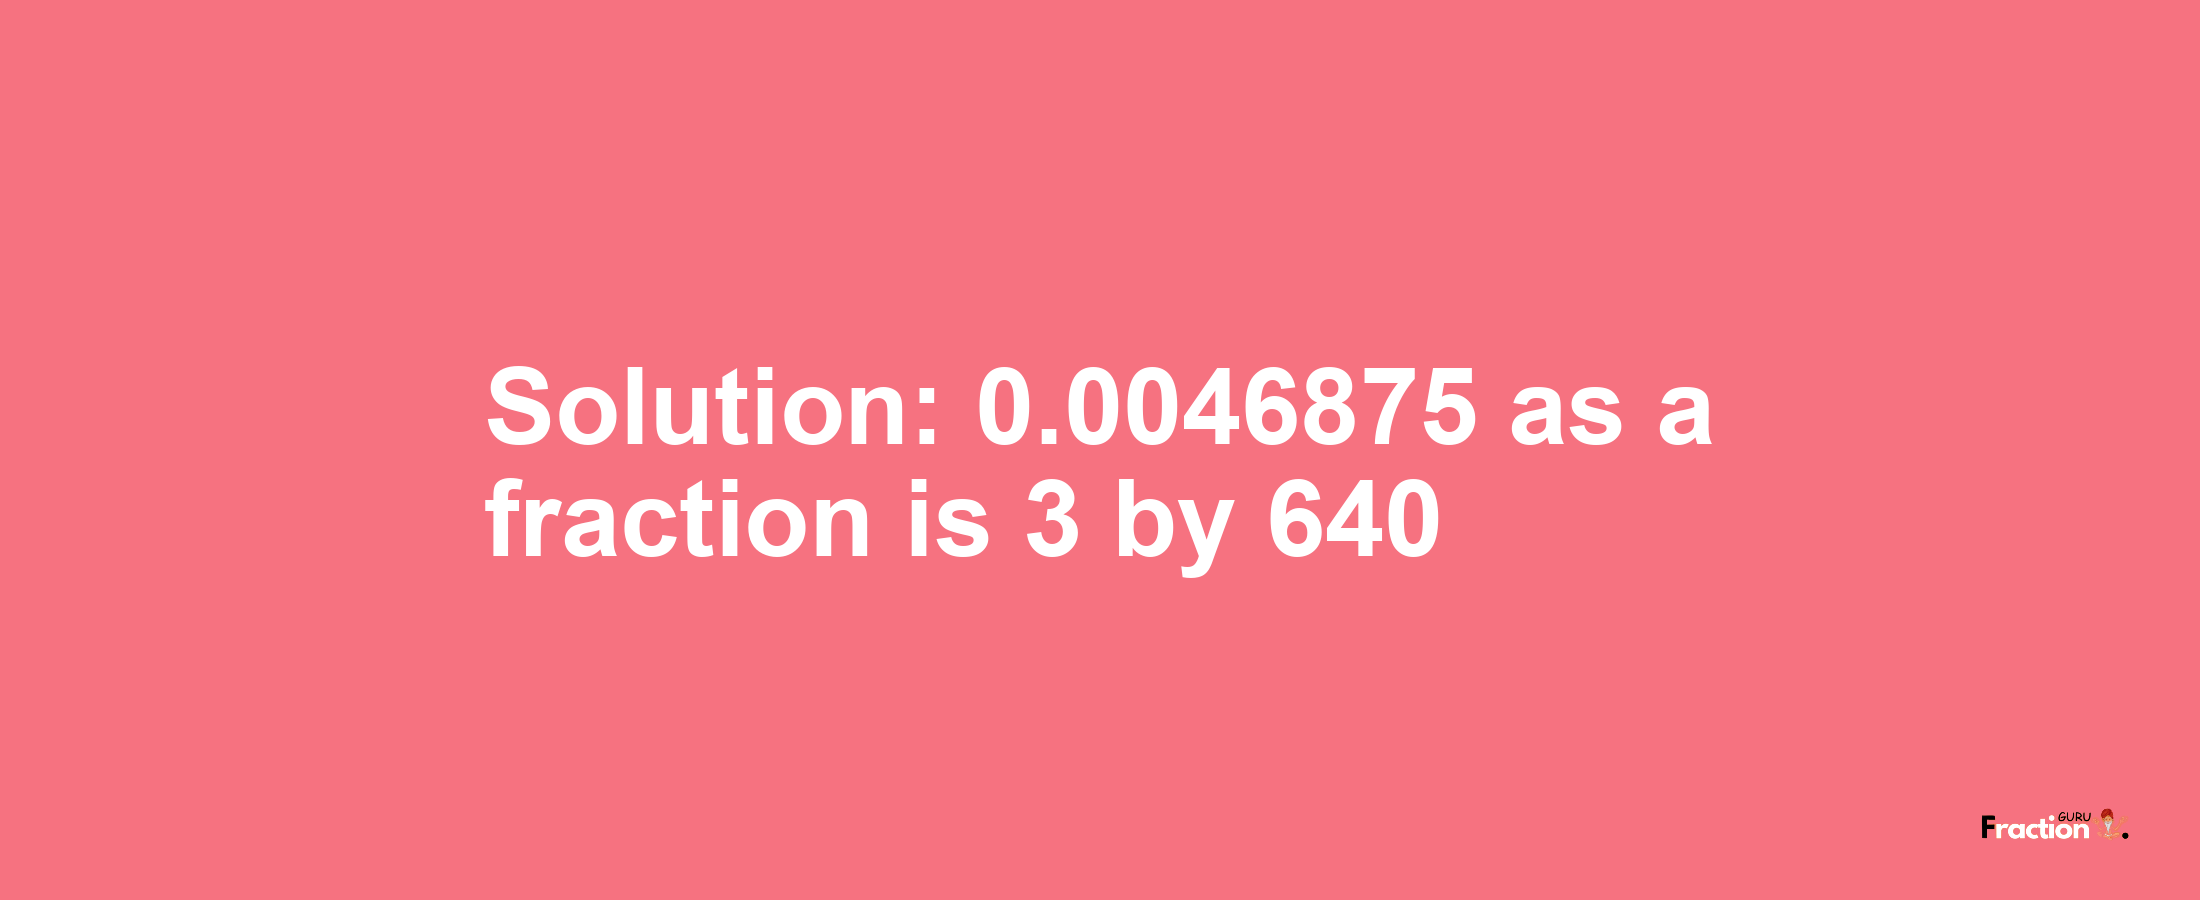 Solution:0.0046875 as a fraction is 3/640